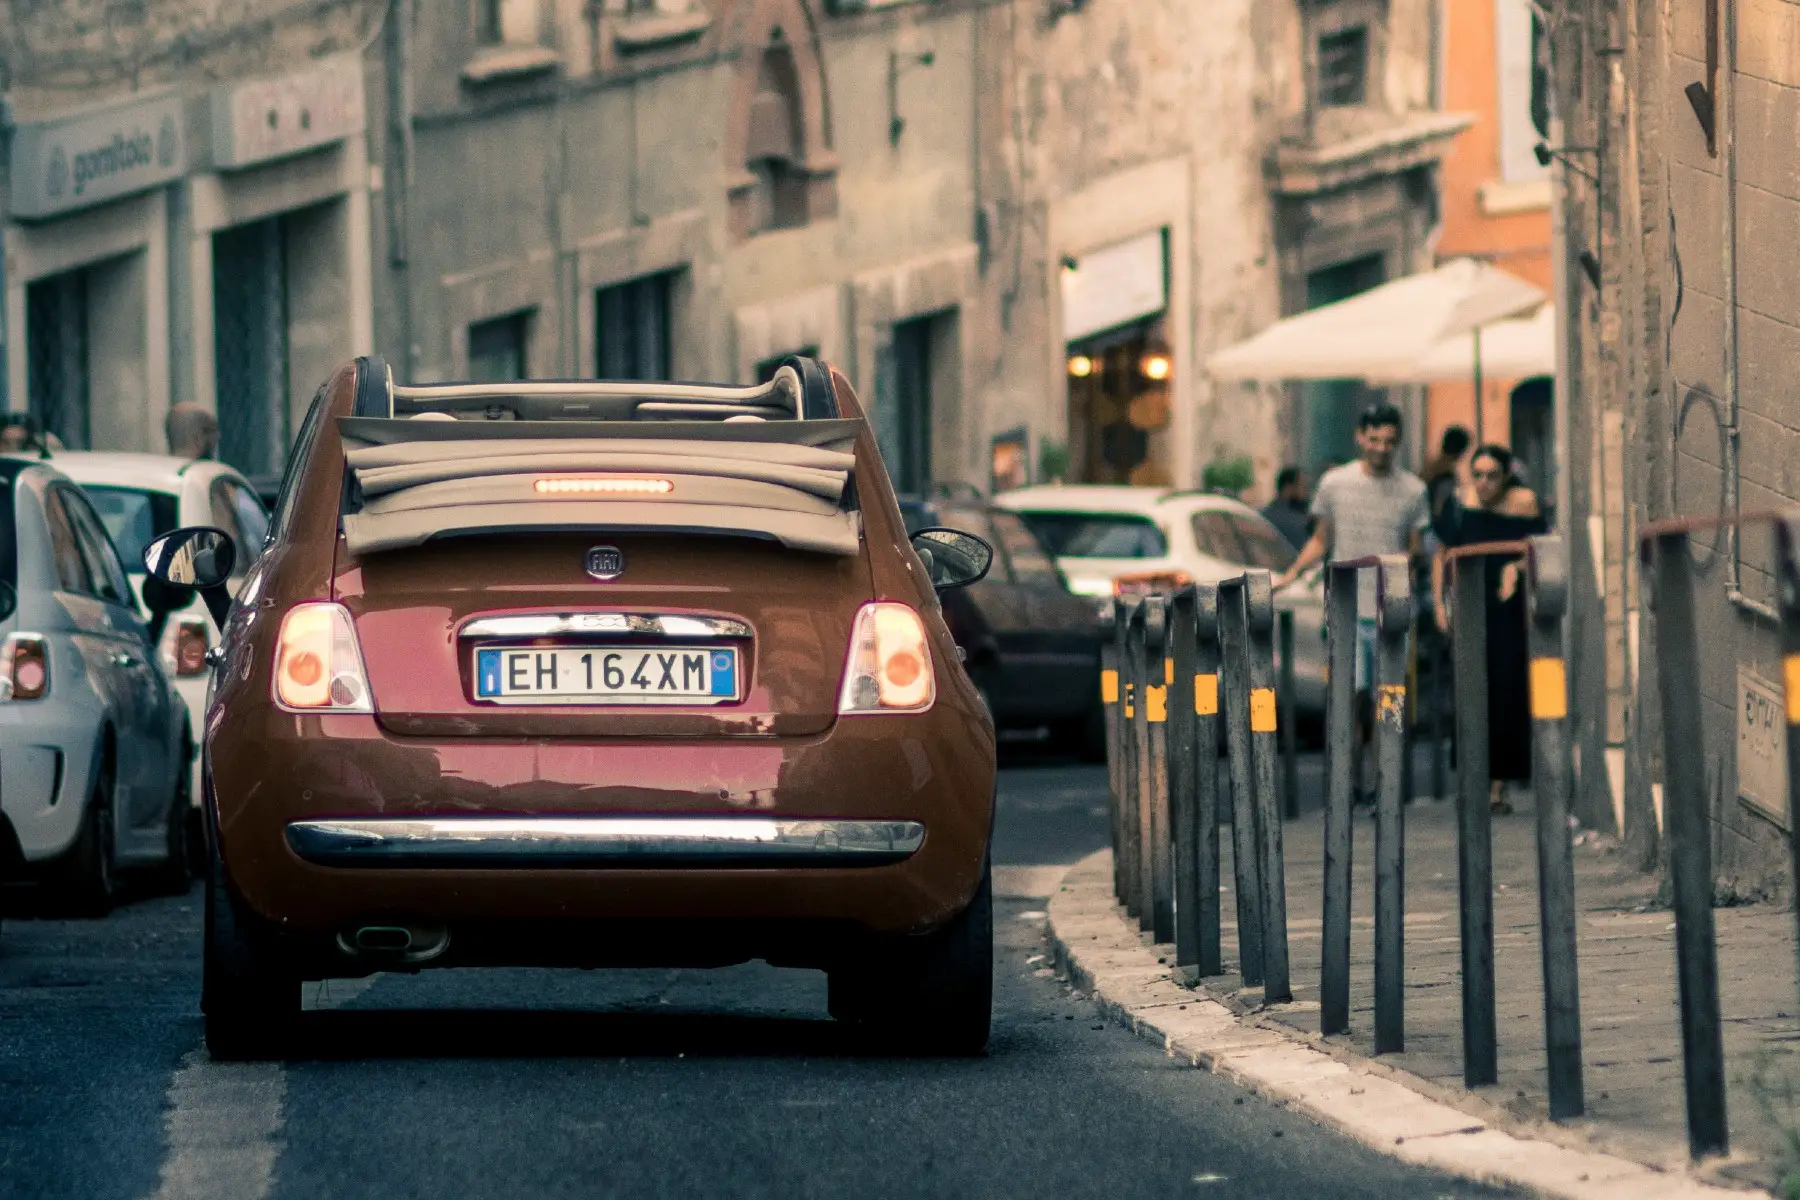 A red Fiat driving along a narrow street lined with parked cars in Perugia, Italy